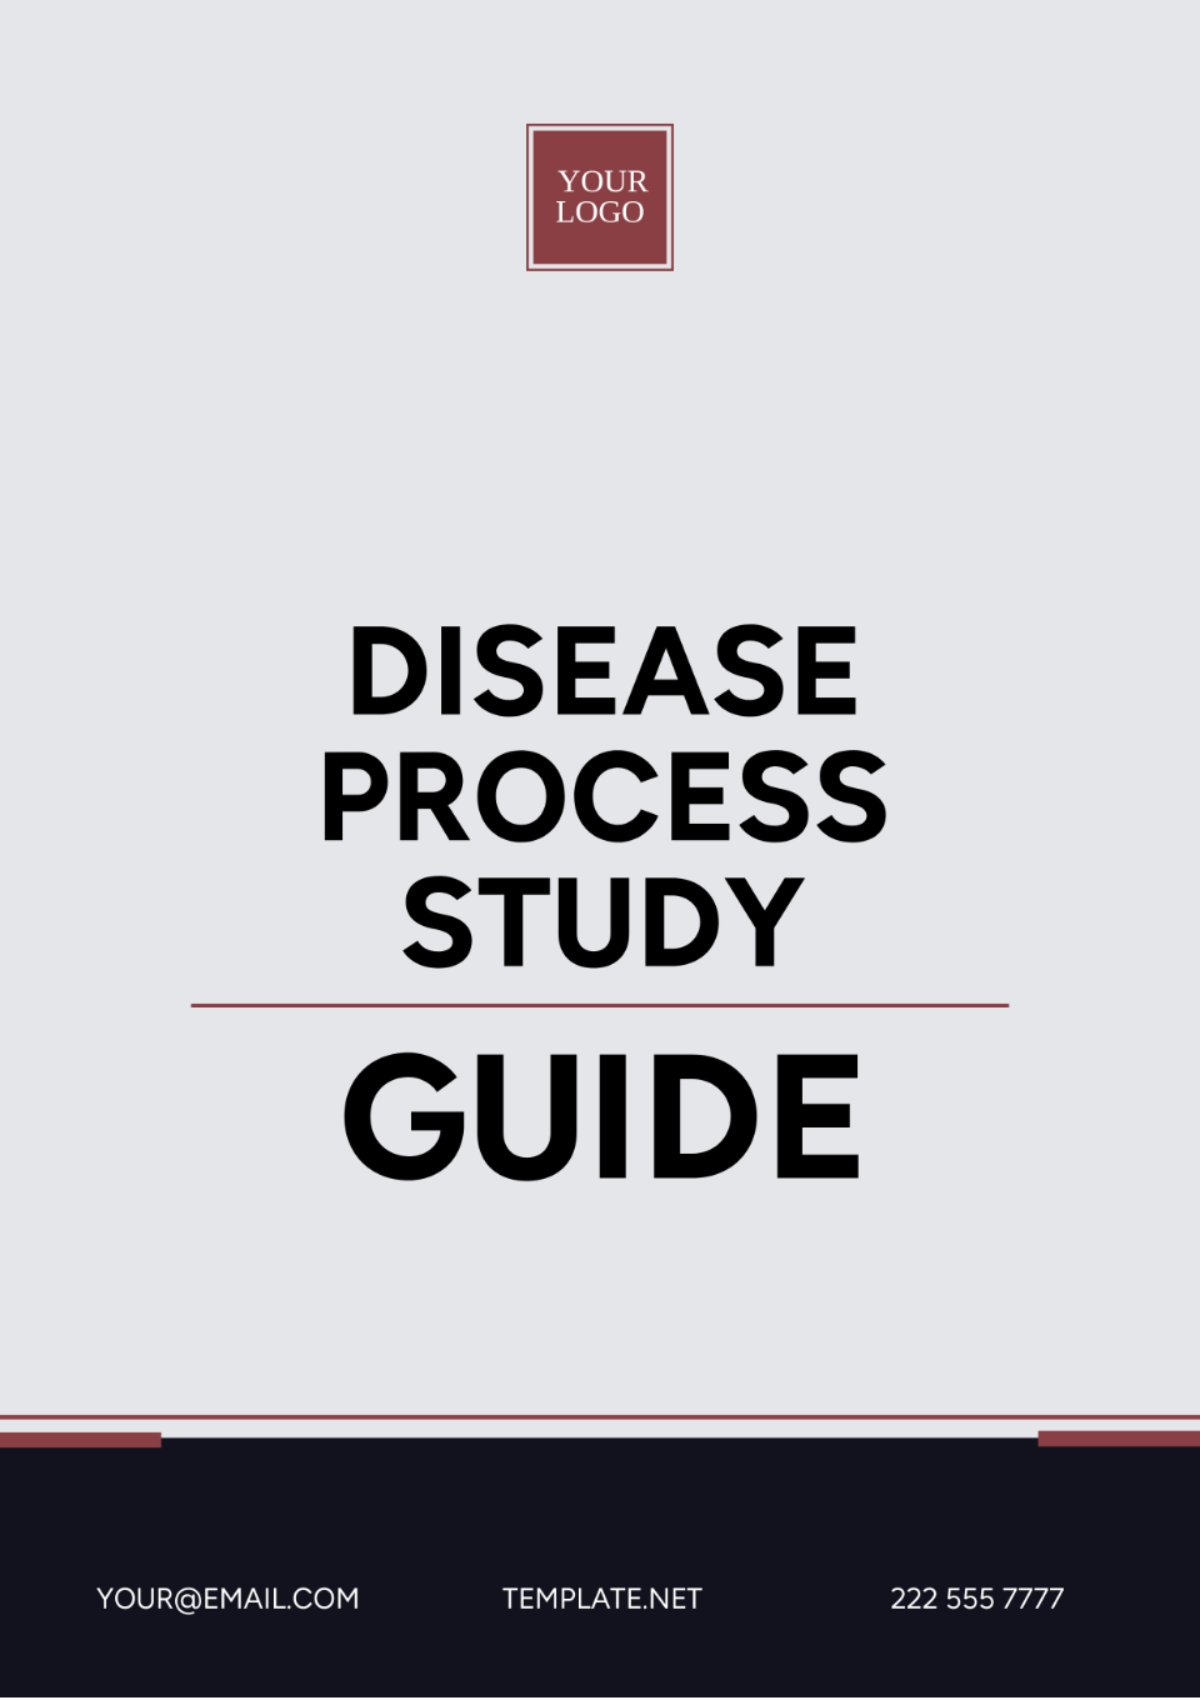 Free Disease Process Study Guide Template